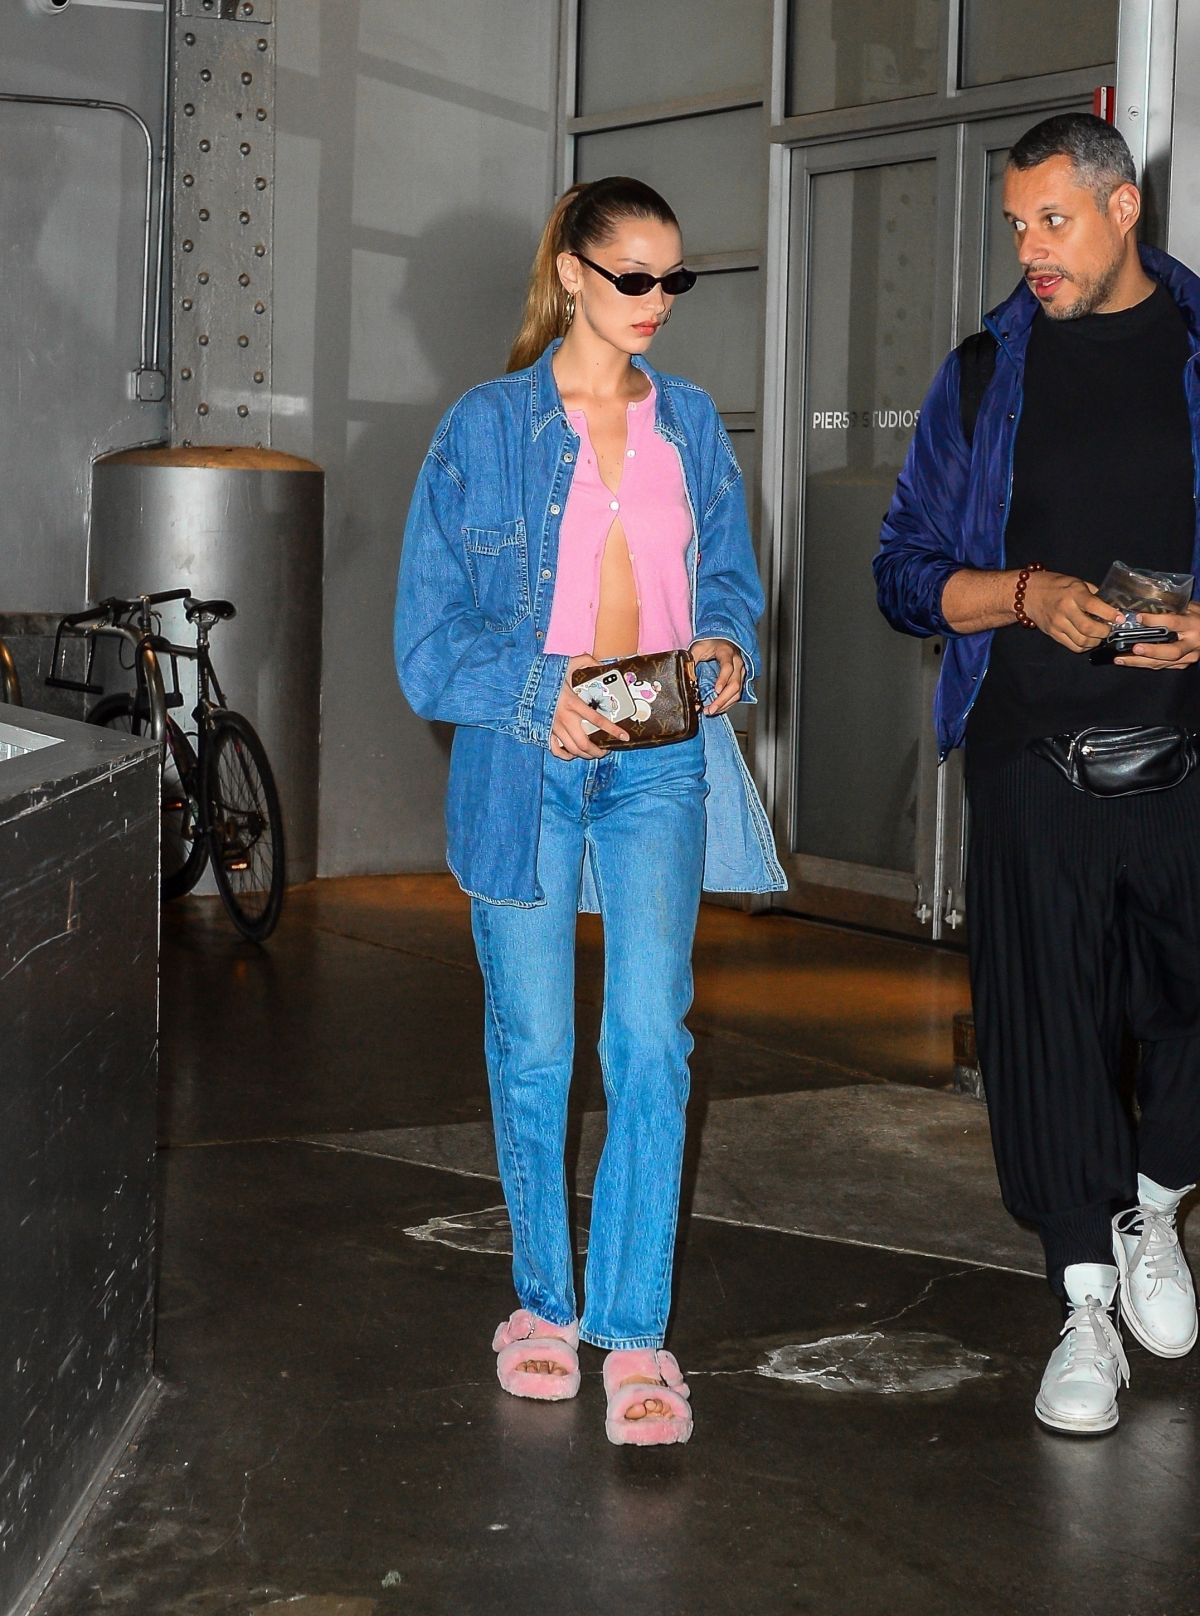 bella-hadid-in-double-denim-out-in-new-york-06-11-2019-2.jpg